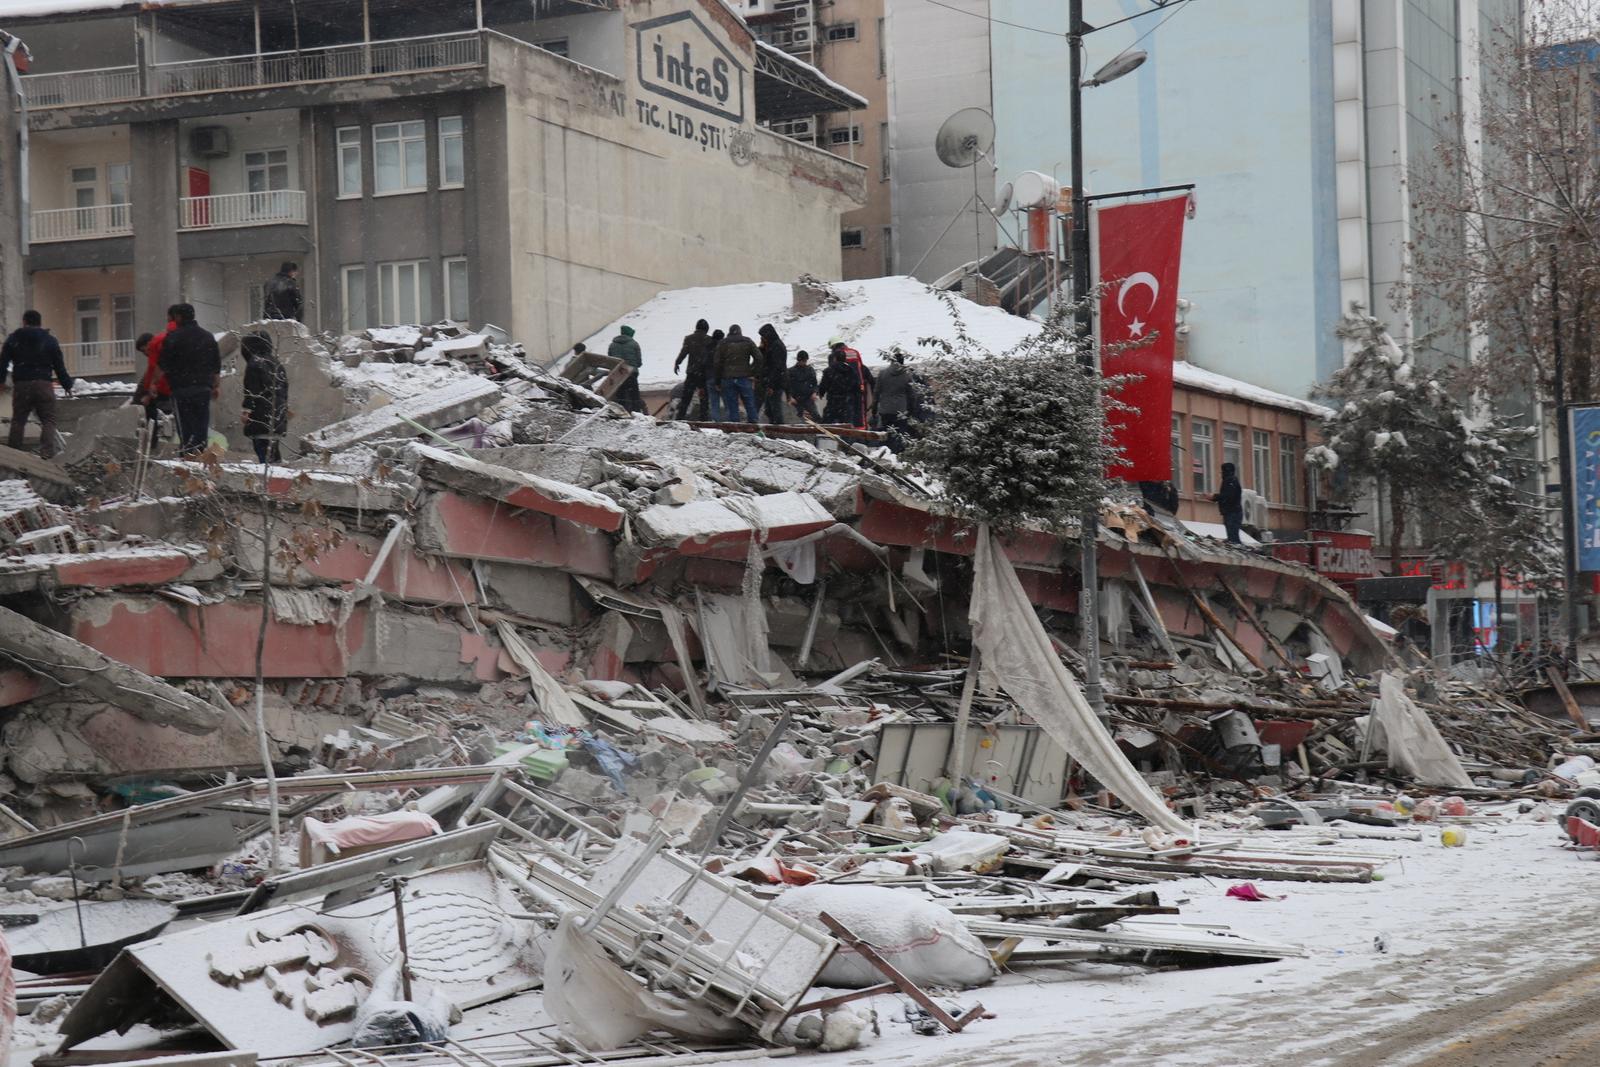 PREVIEW XML Rescuers carry out a person from a collapsed building after an earthquake in Malatya, Turkey February 6, 2023.